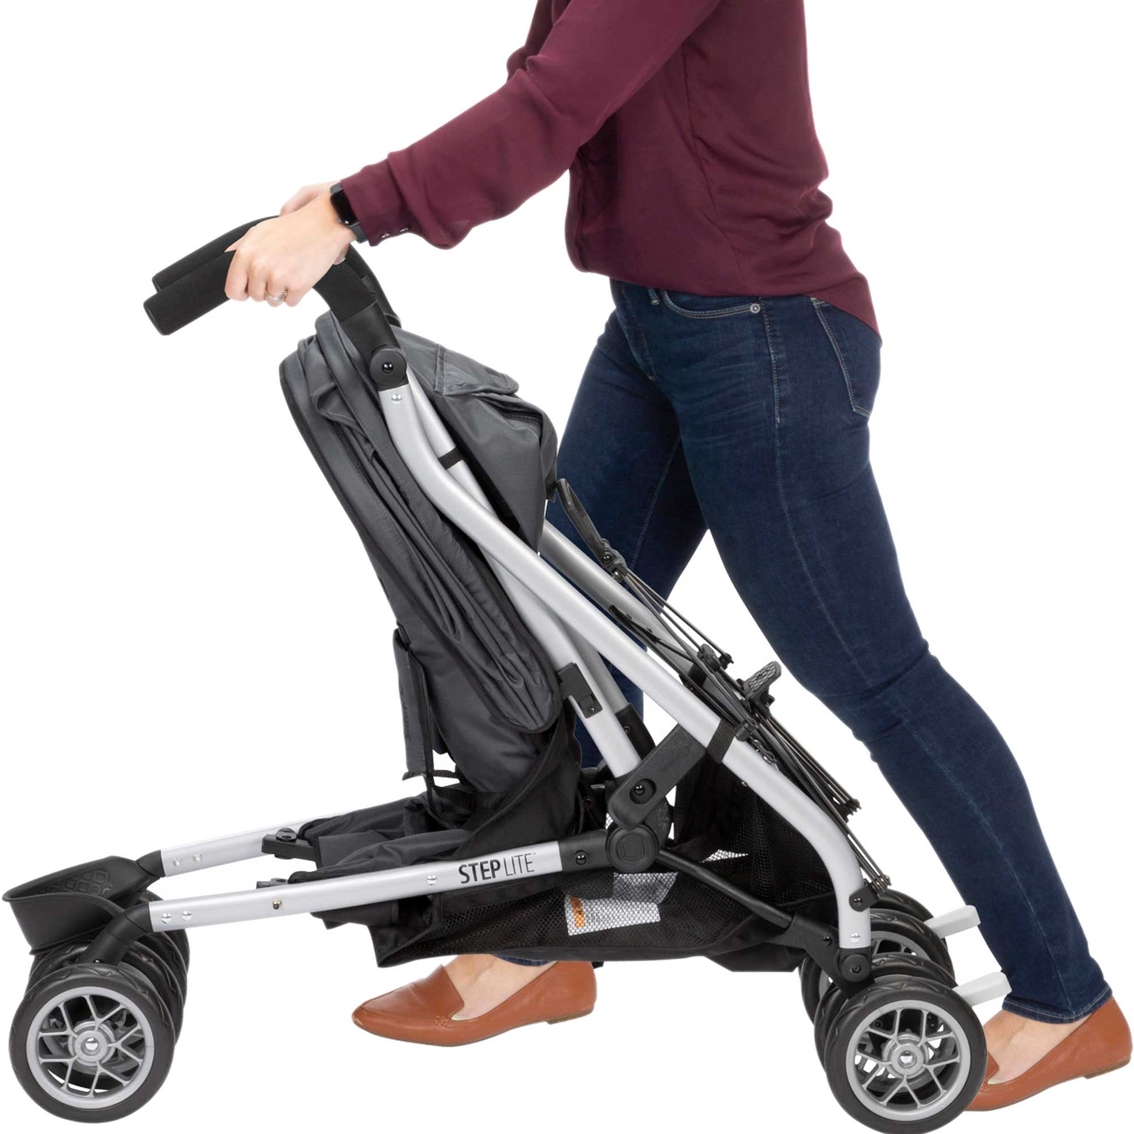 Safety 1st Step Lite Compact Stroller - Image 8 of 10